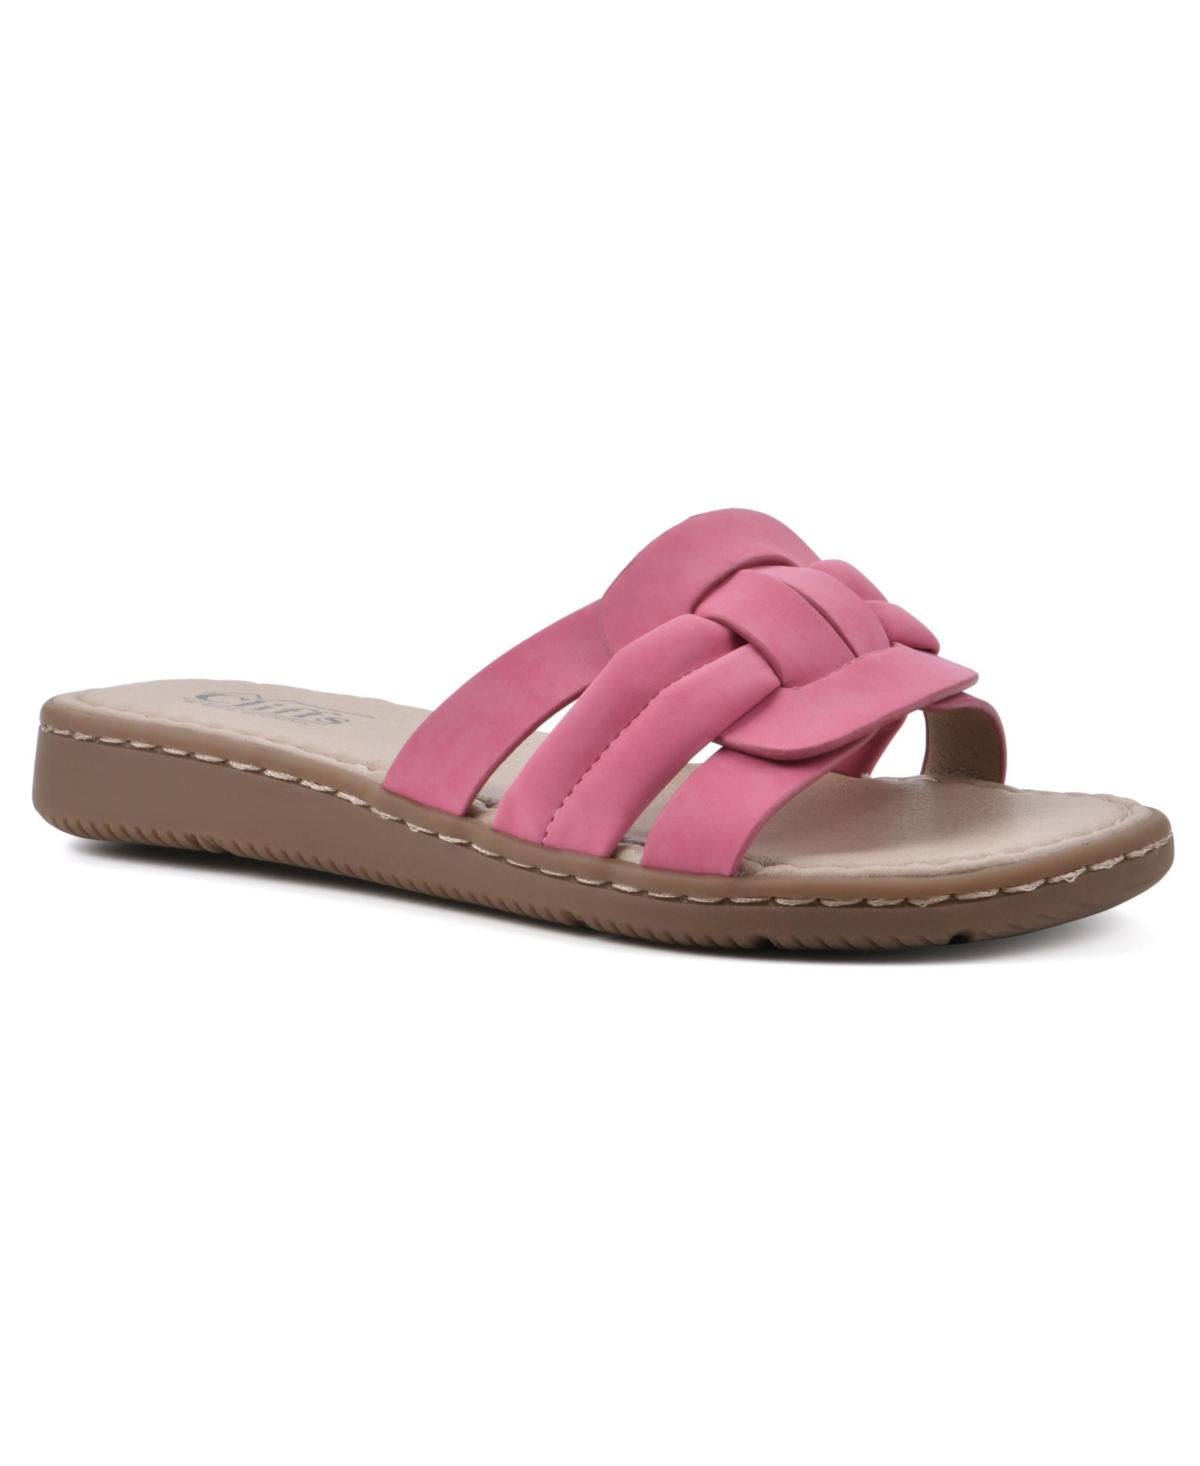 Cliffs by White Mountain Women's Squarely Slide Comfort Sandal Women's Shoes